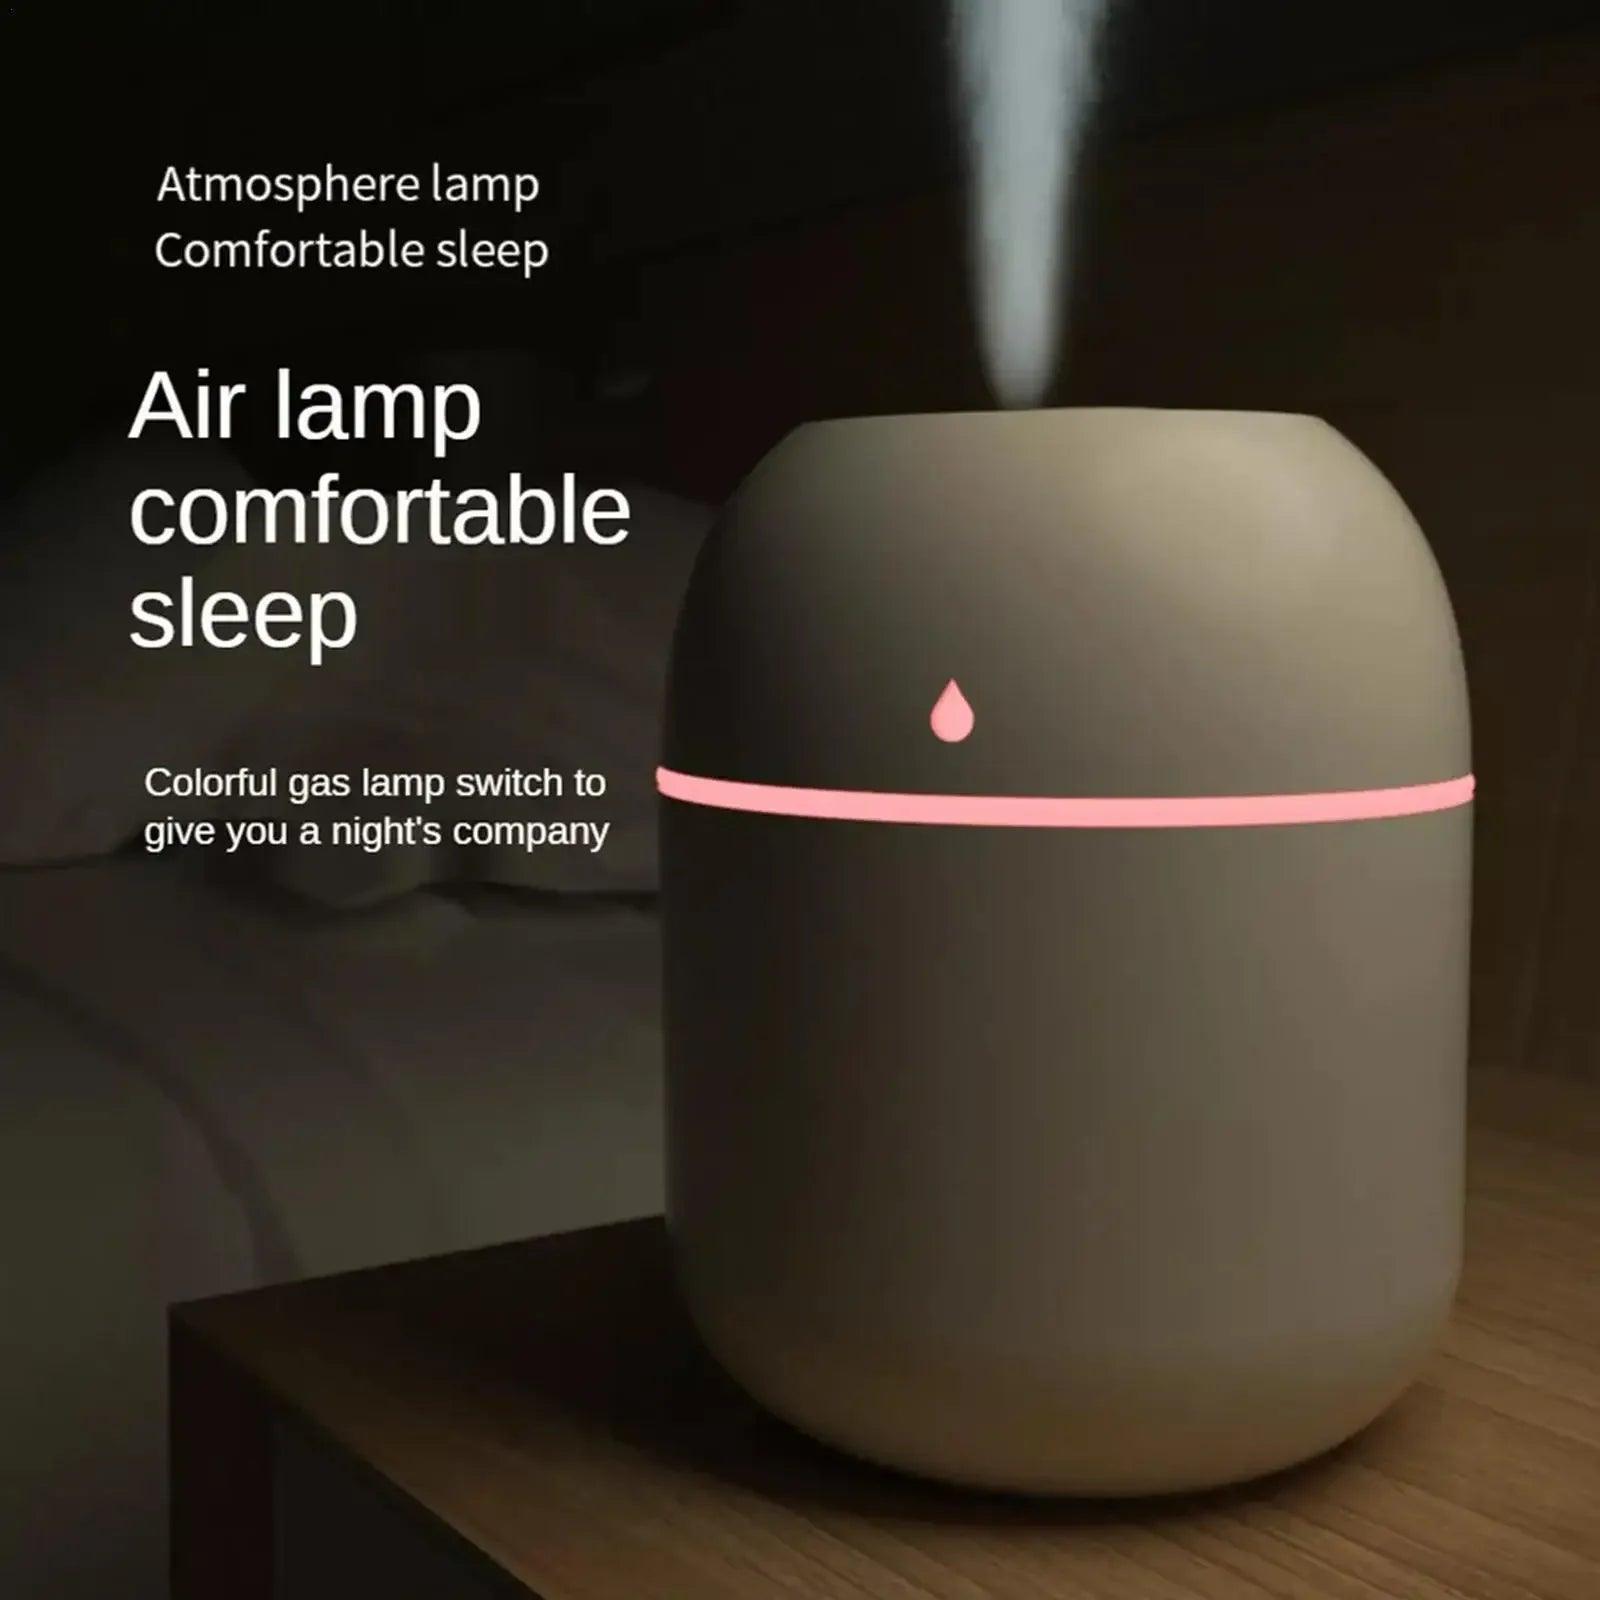 USB Aroma Diffuser with Silent Operation and Auto Power-off Protection  ourlum.com   